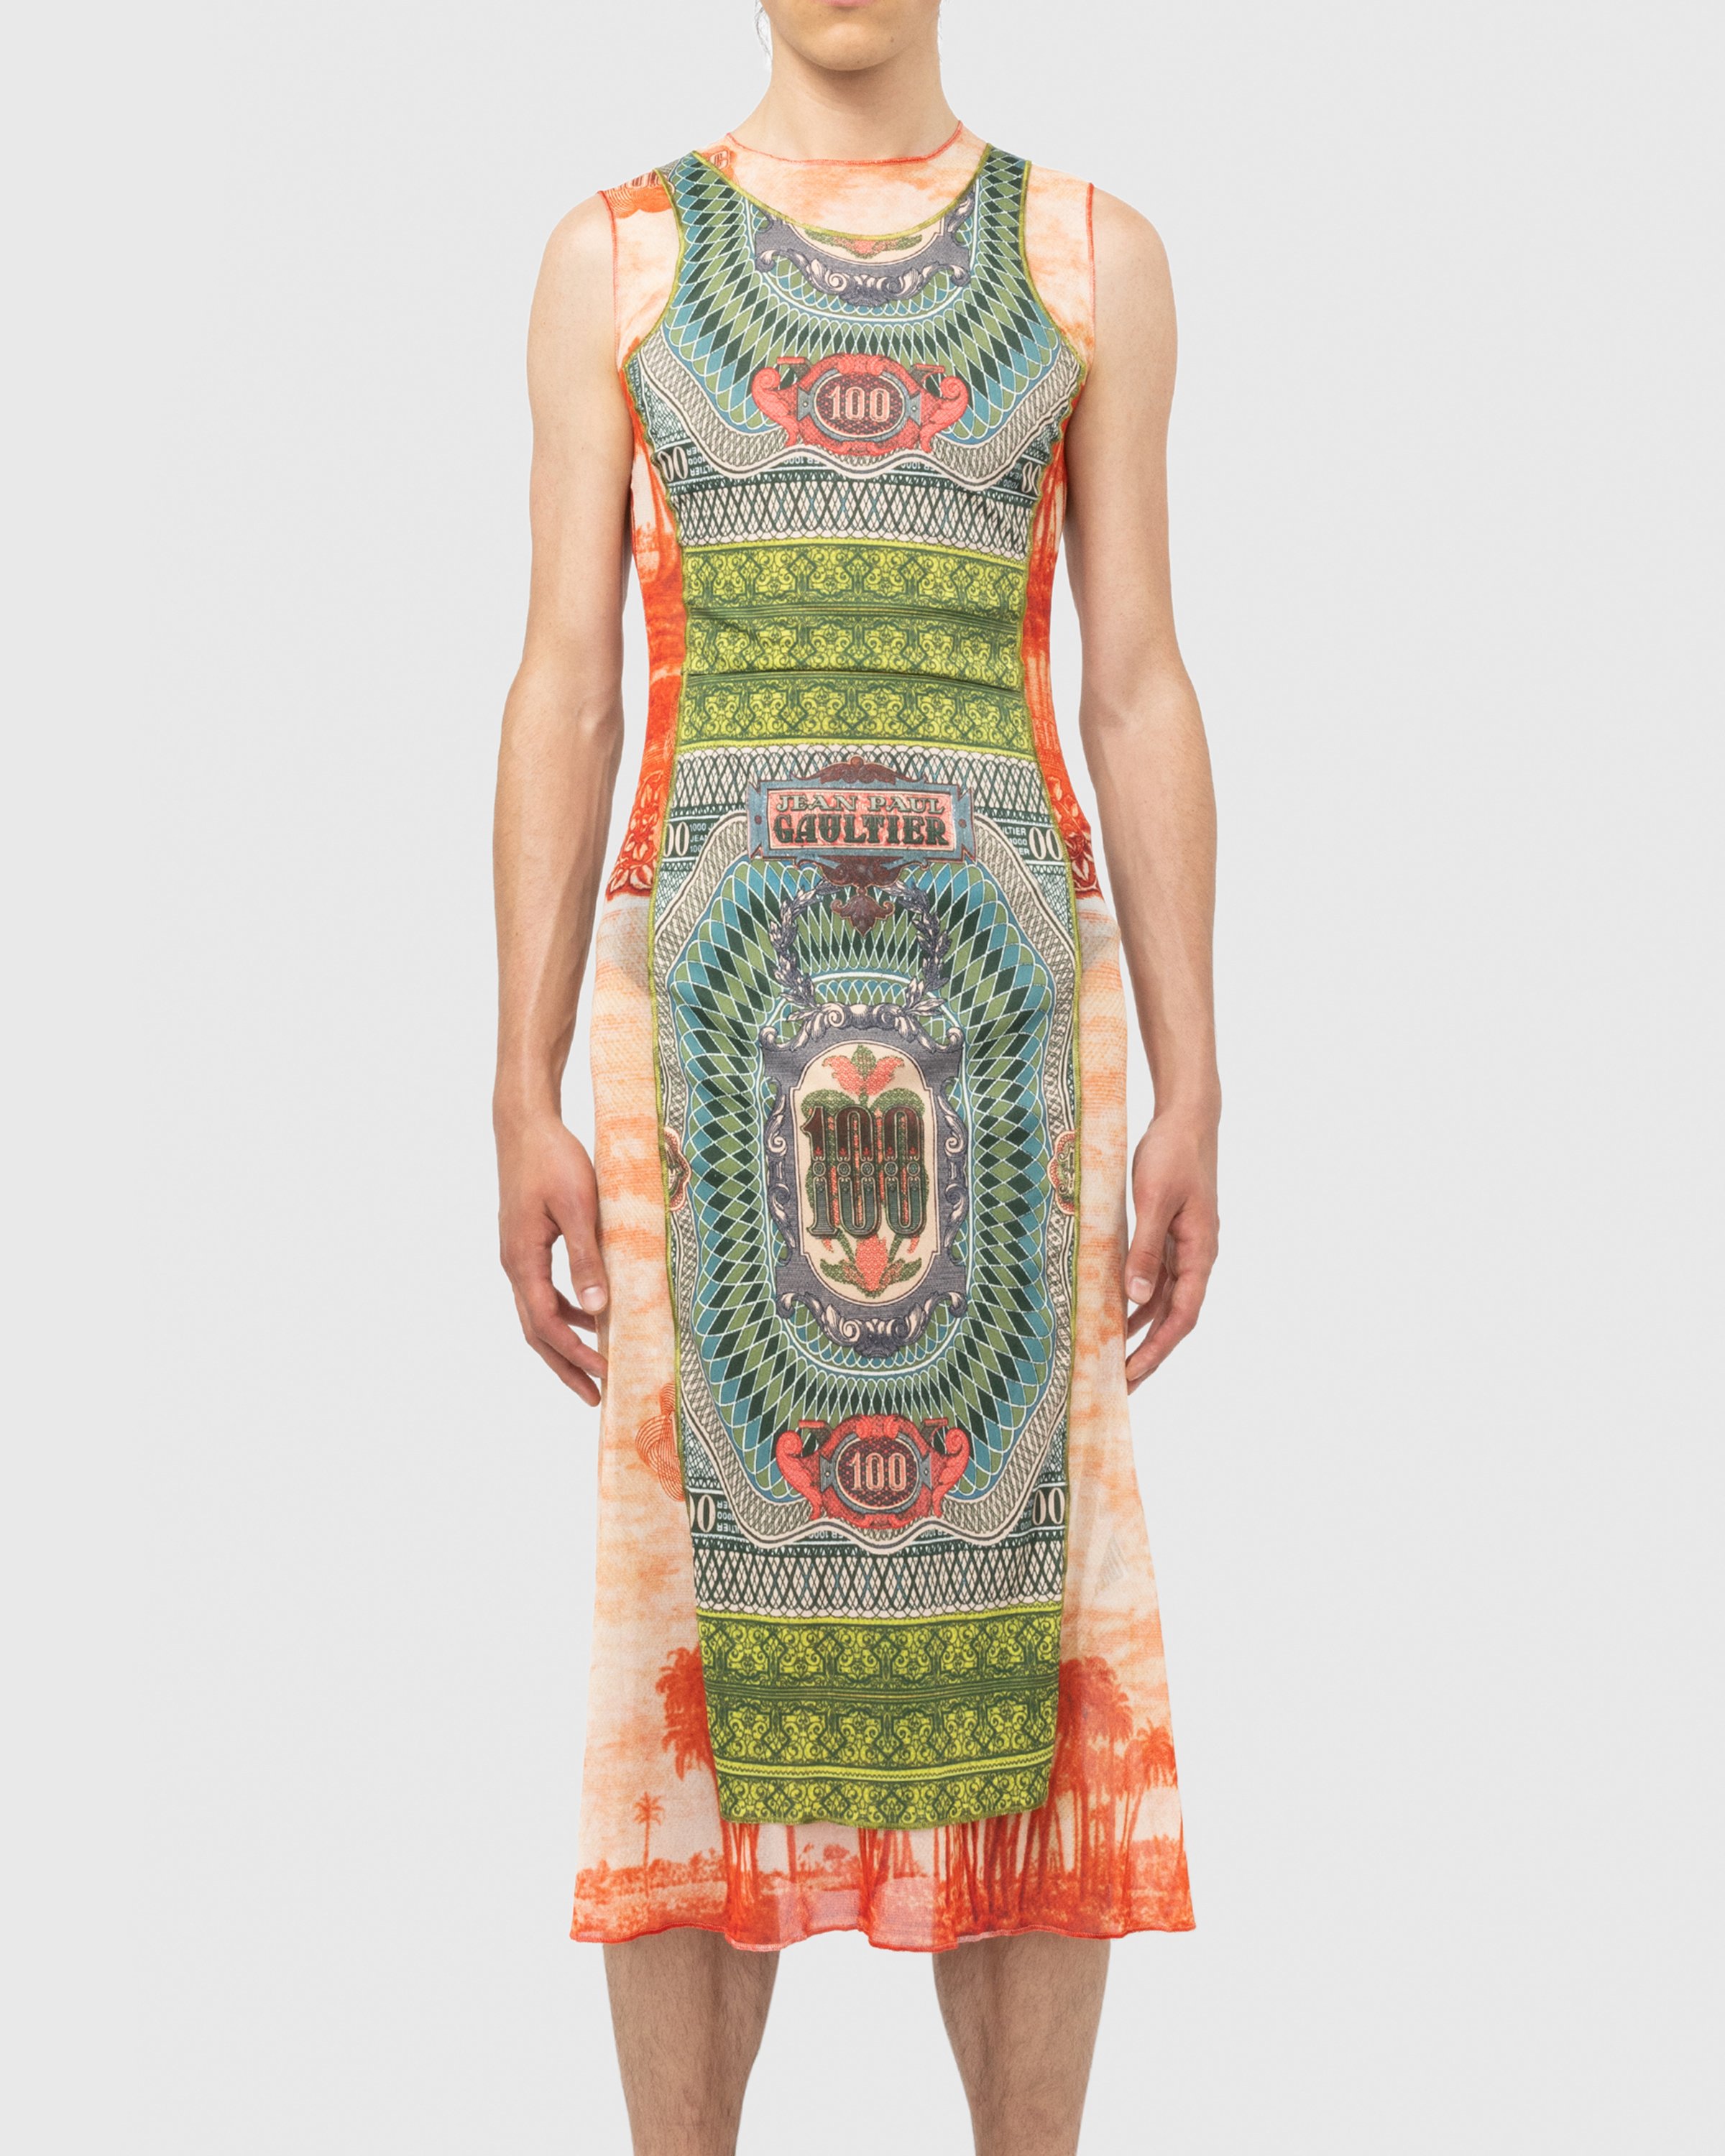 Jean Paul Gaultier - Banknote and Palm Tree Print Dress Multi - Clothing - Green - Image 2